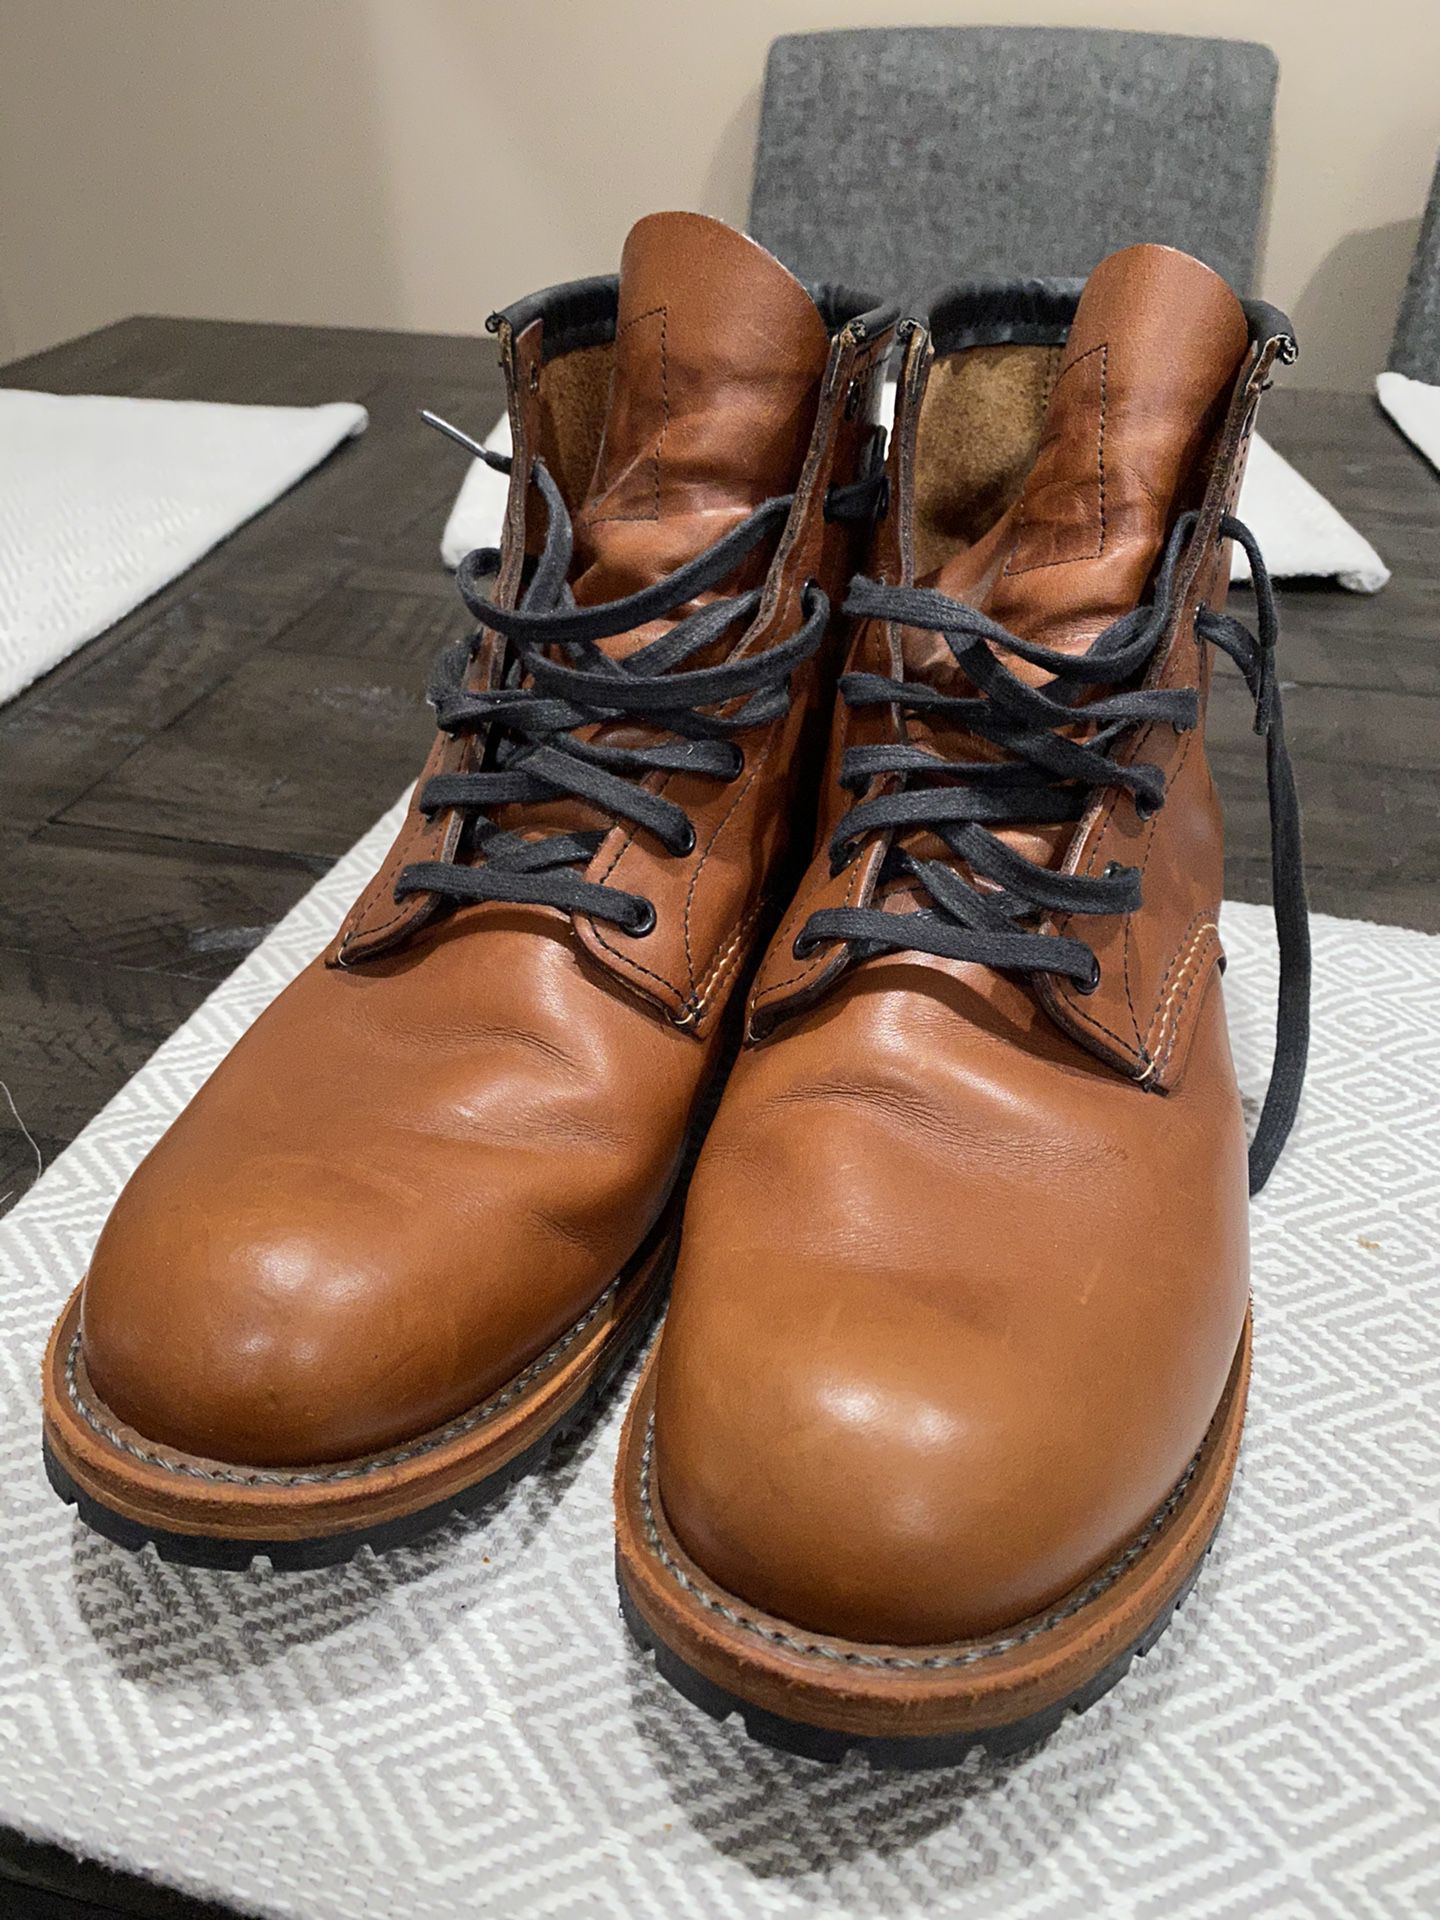 Brand new Redwing Boots